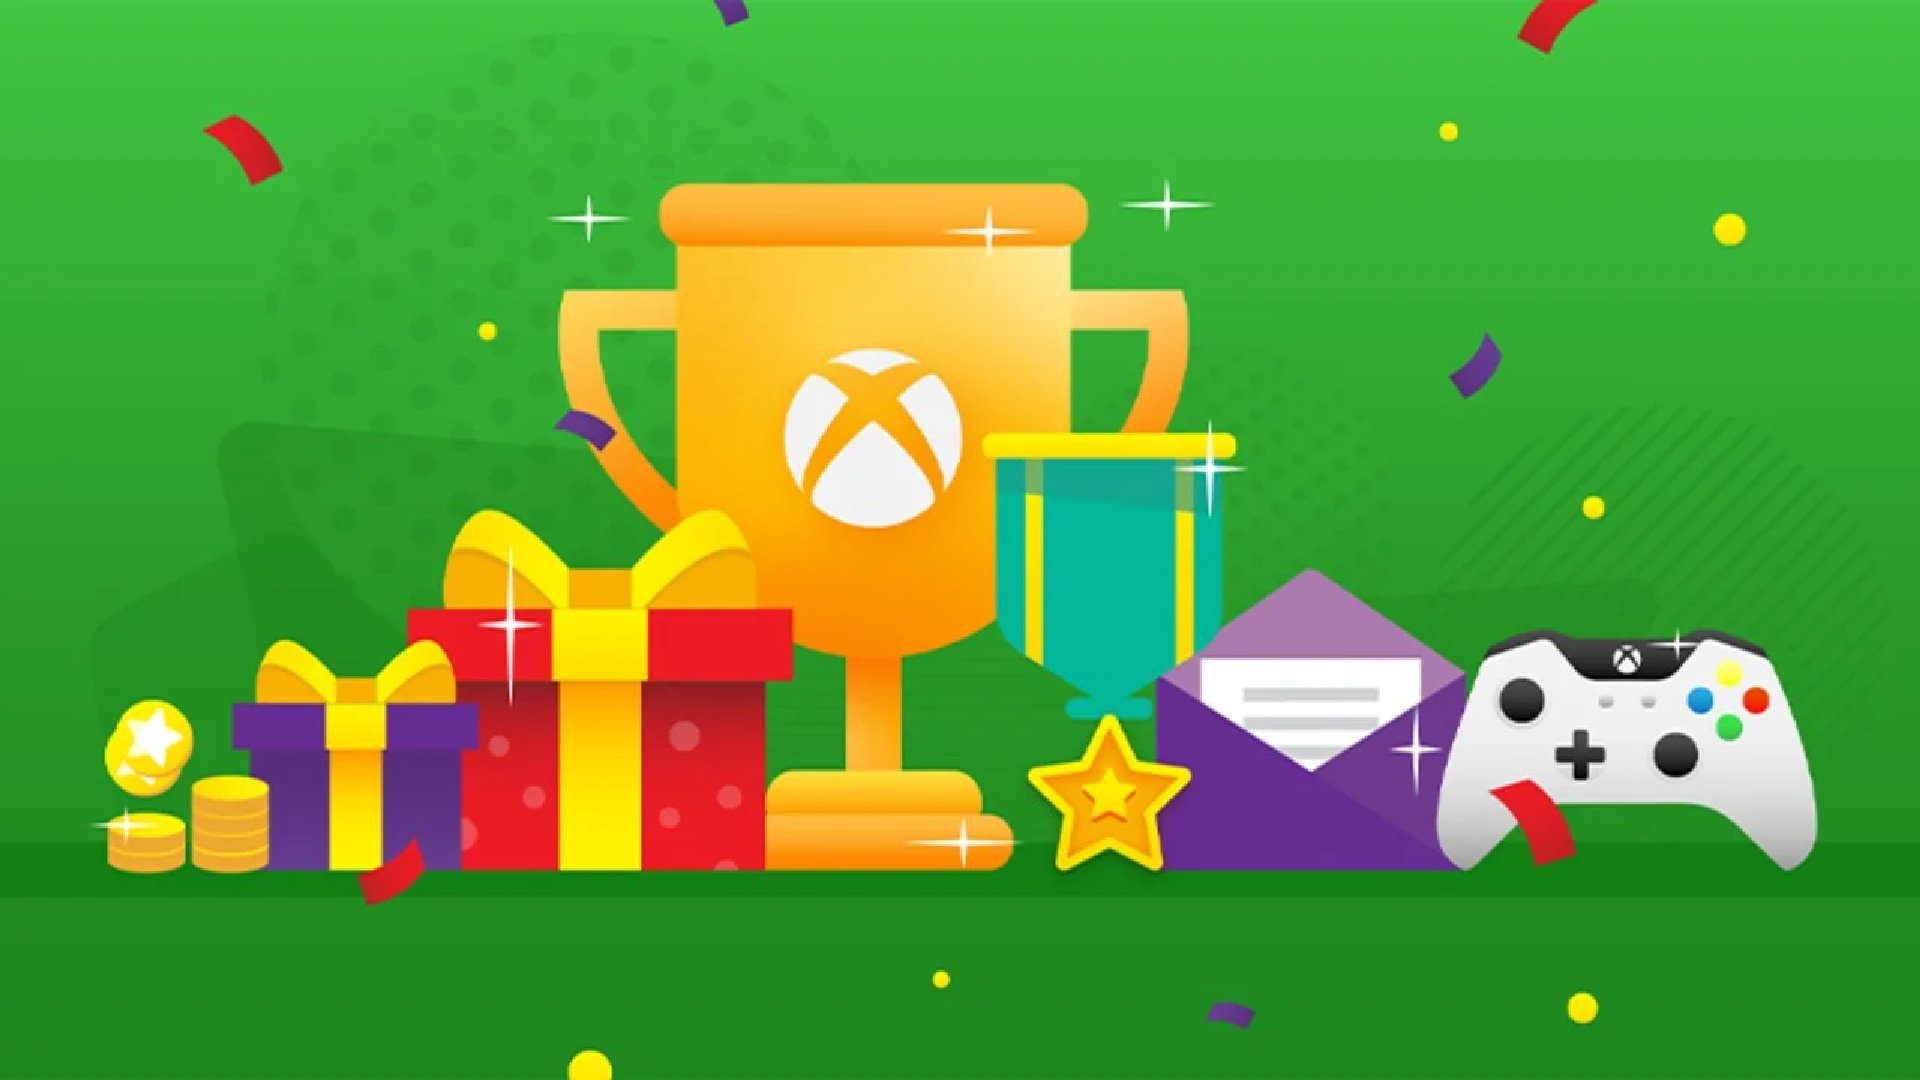 Microsoft implements a new way to earn Rewards points